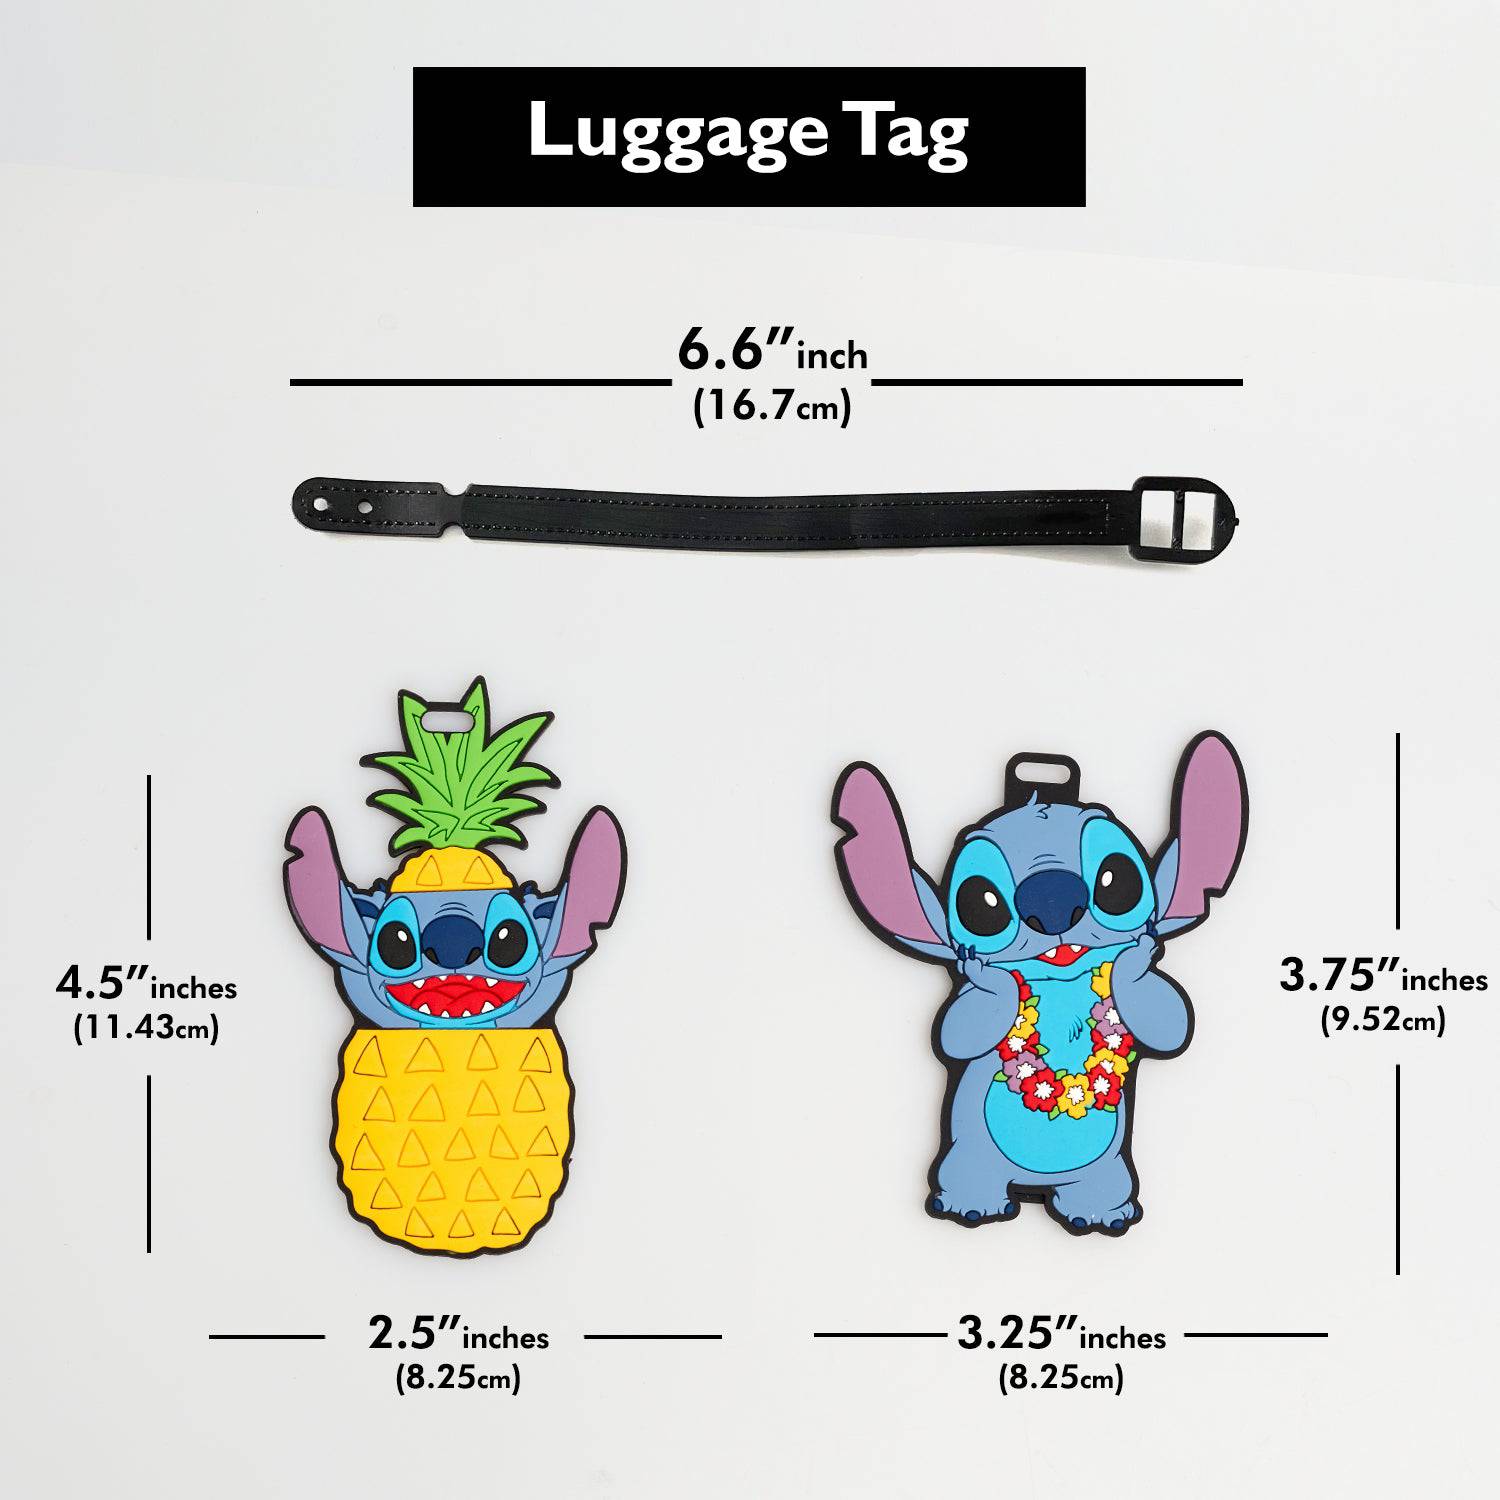 Luggage Tags Mini Drop [Live 7/29/23 @ 7 pm ET] – Knot Impossible Creations